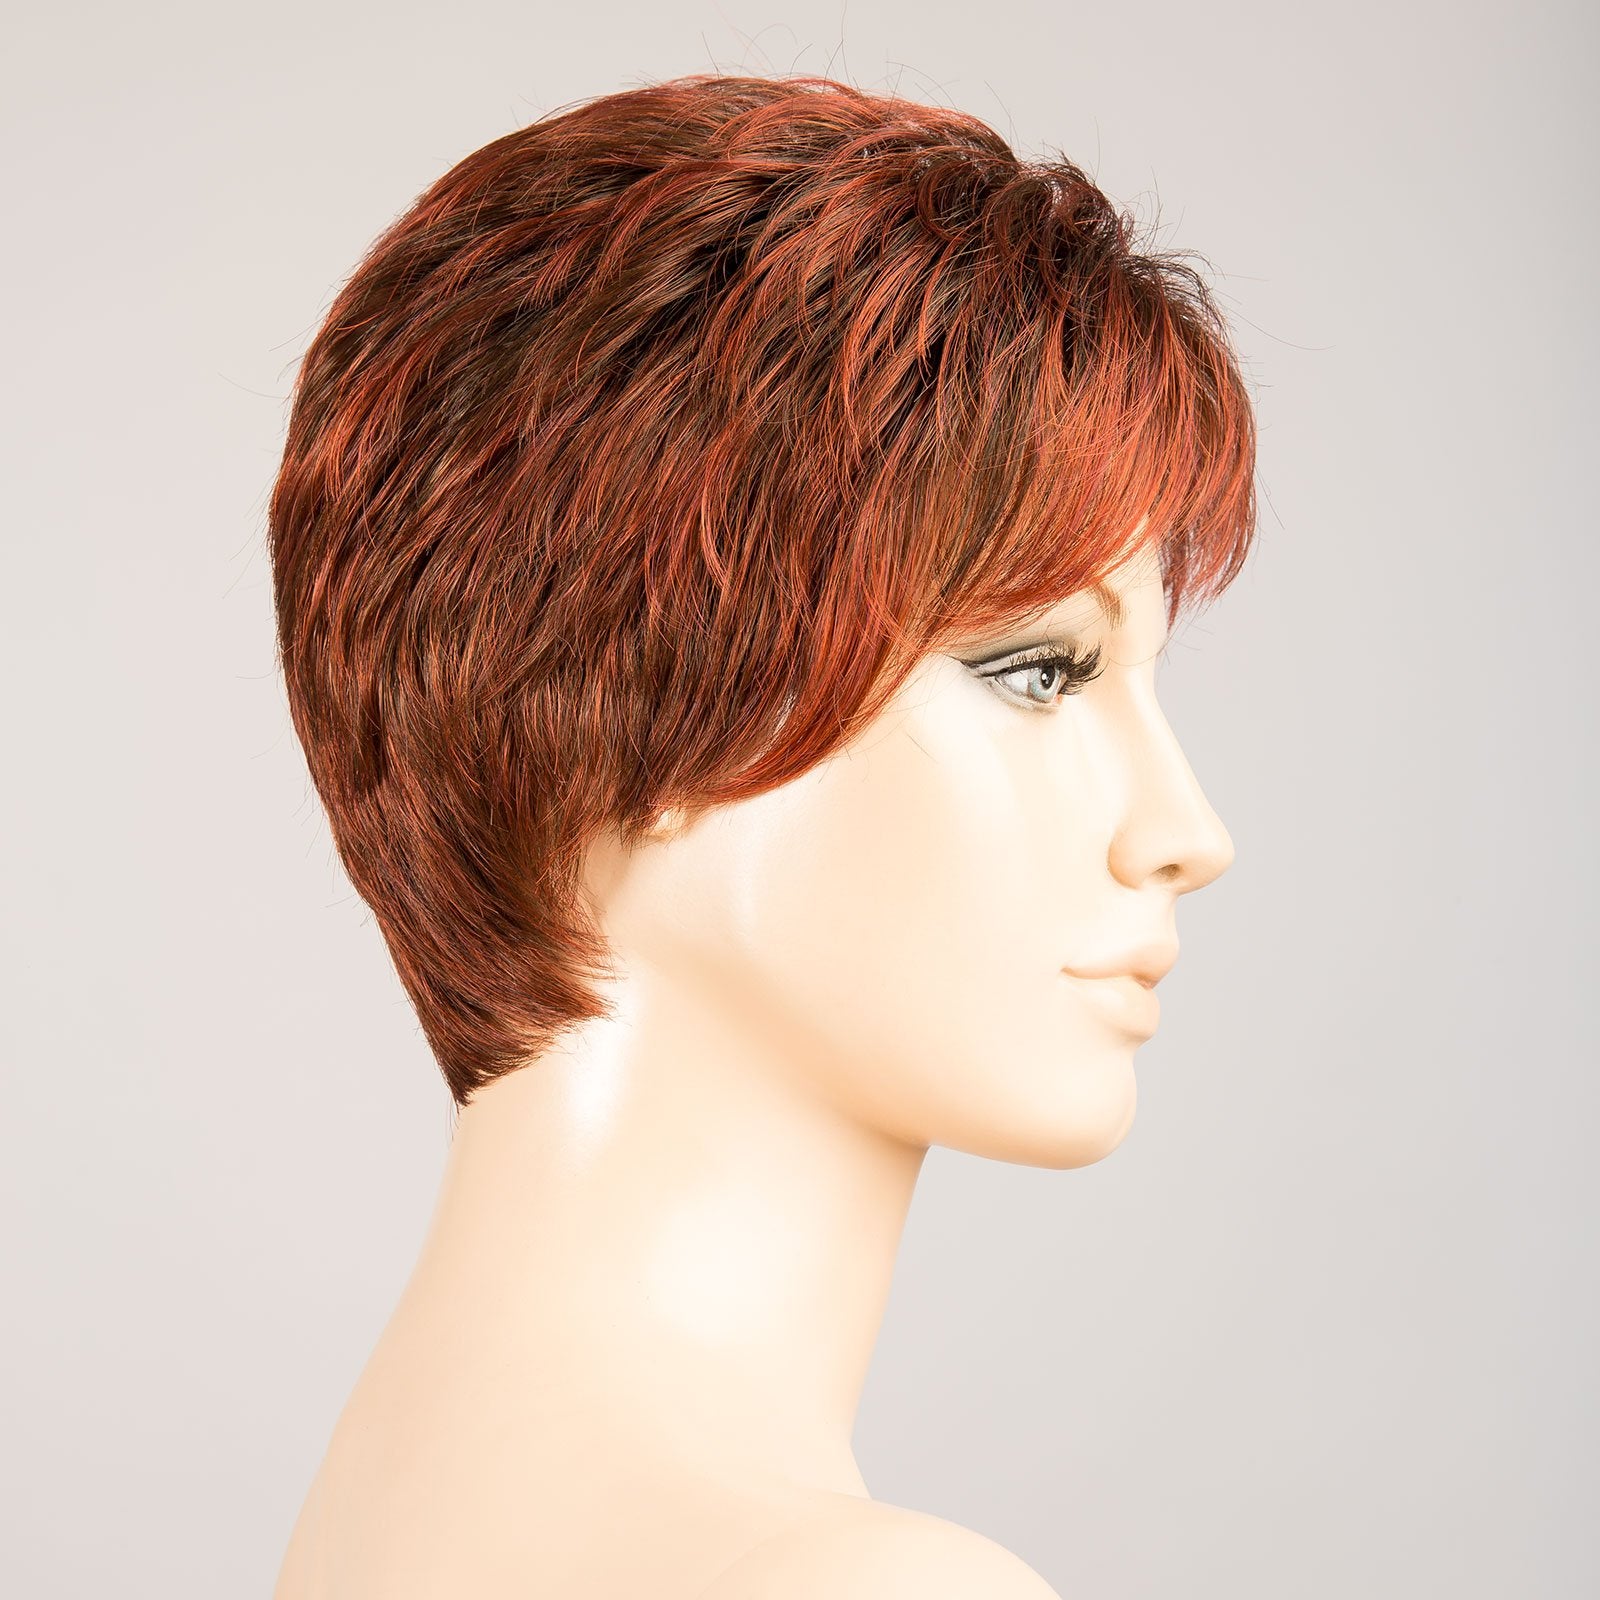 SPRING HI | Synthetic Lace Front Wig | Ellen Wille